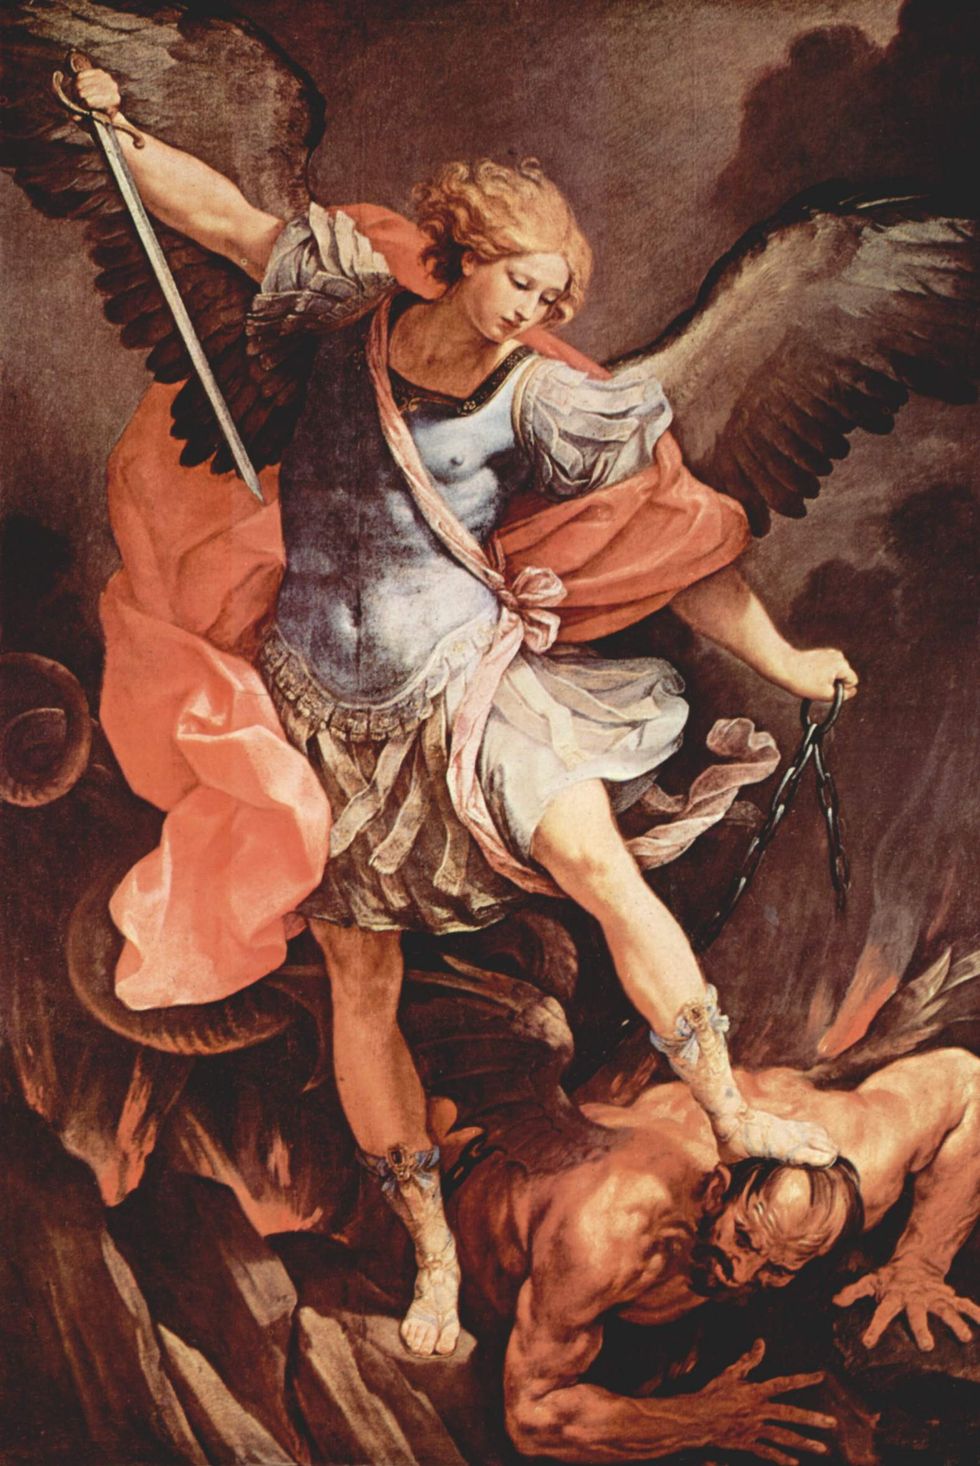 Saint Michael The Archangel and the Leader of the Celestial Army of God